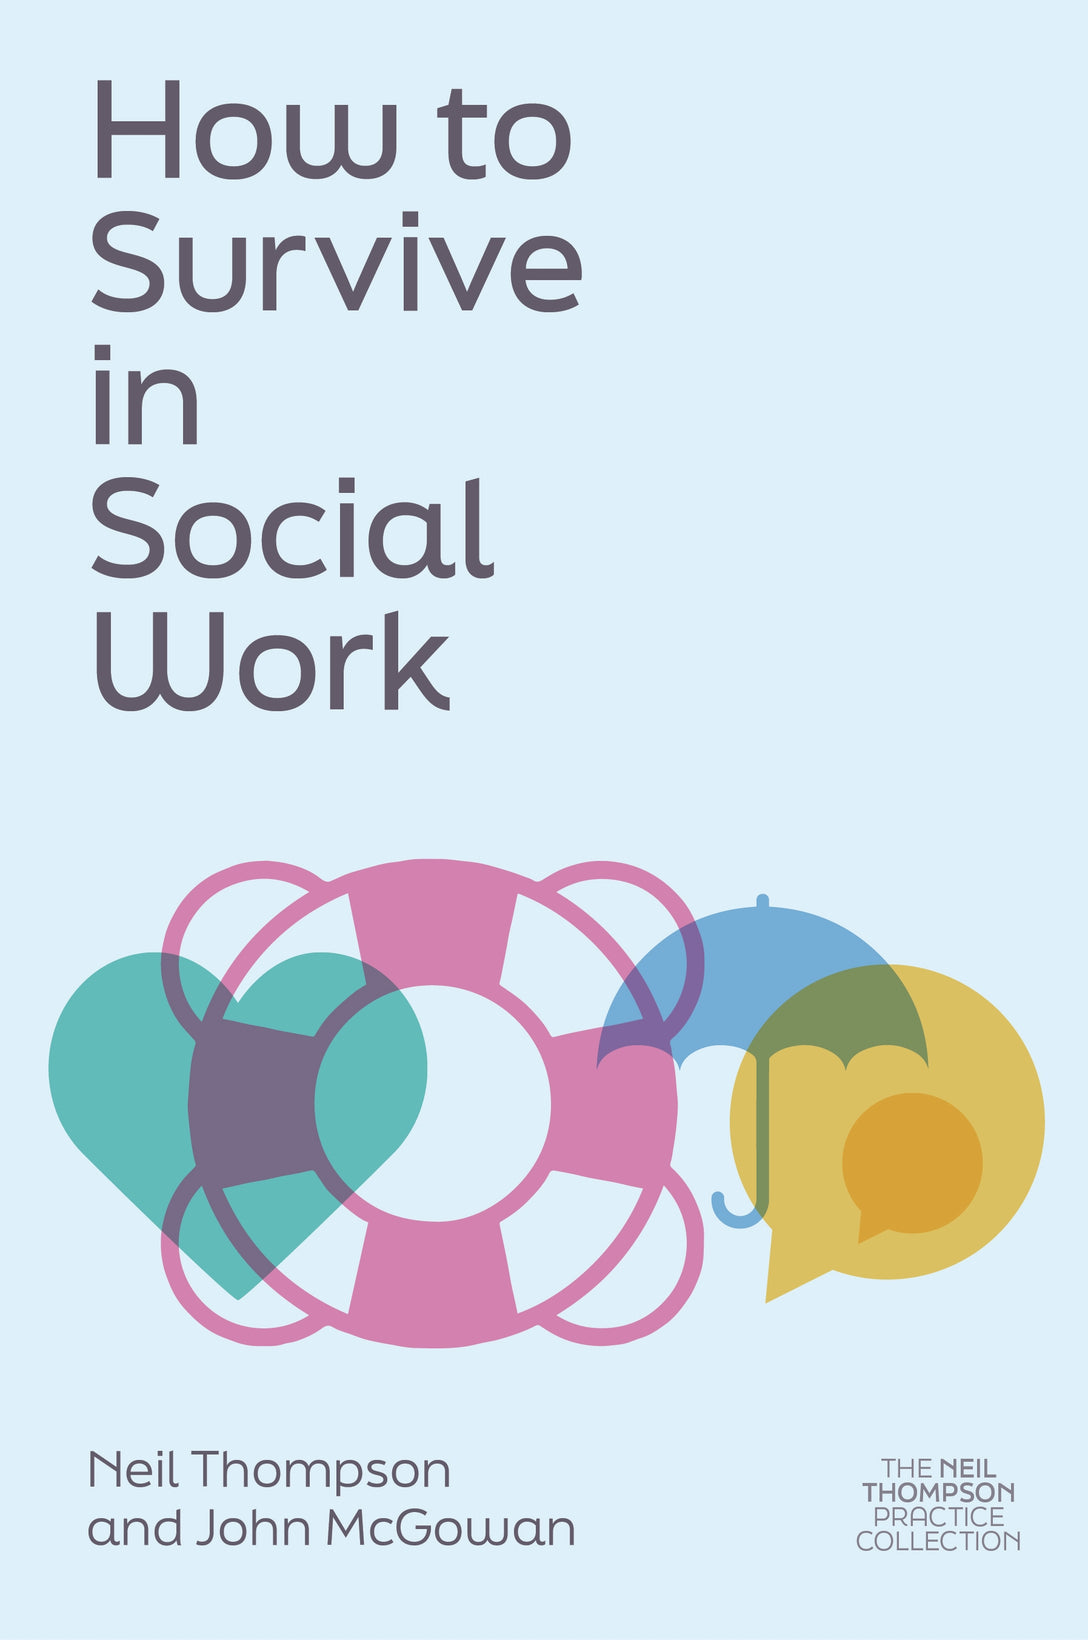 How to Survive in Social Work by Neil Thompson, John McGowan, Ruth Allen